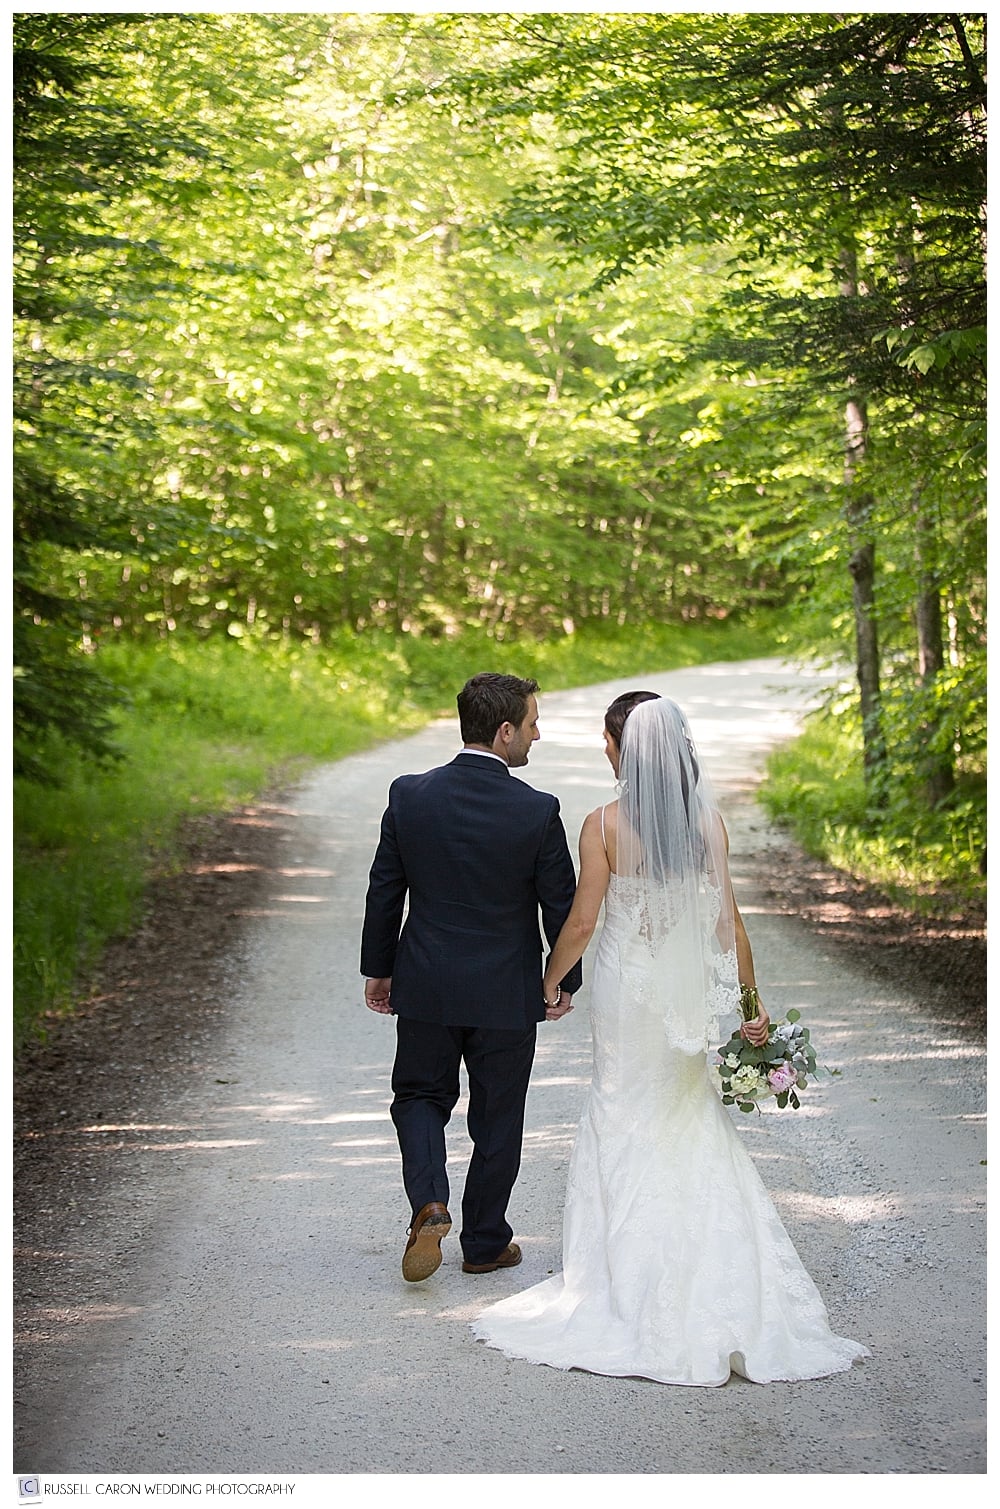 bride-and-groom-walking-hand-in-hand-up-dirt-road